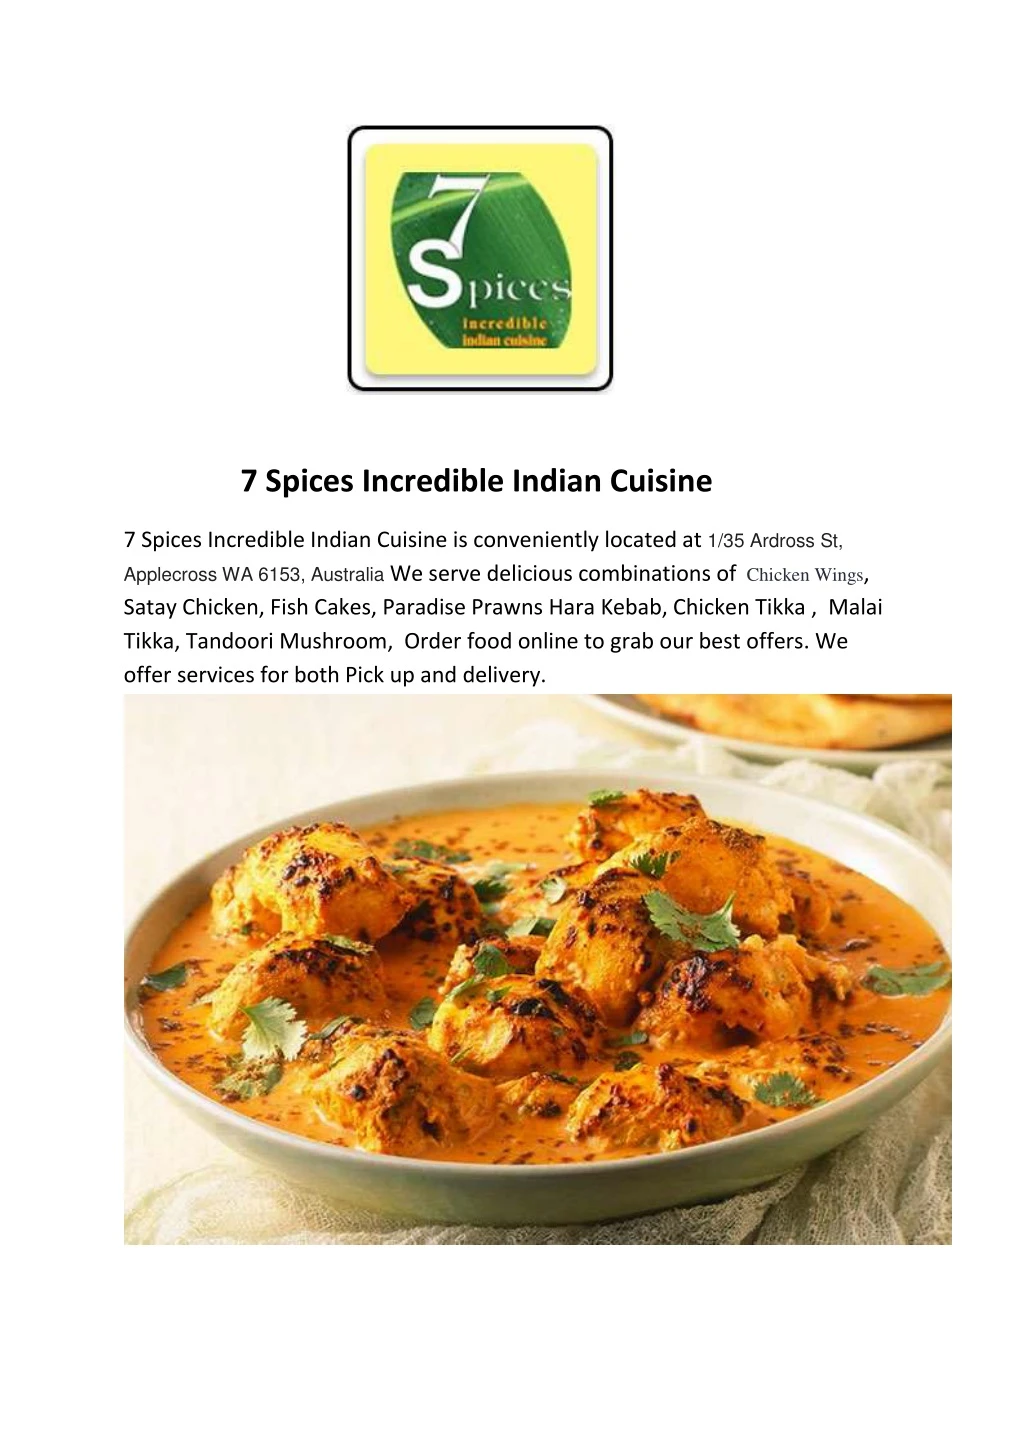 7 spices incredible indian cuisine